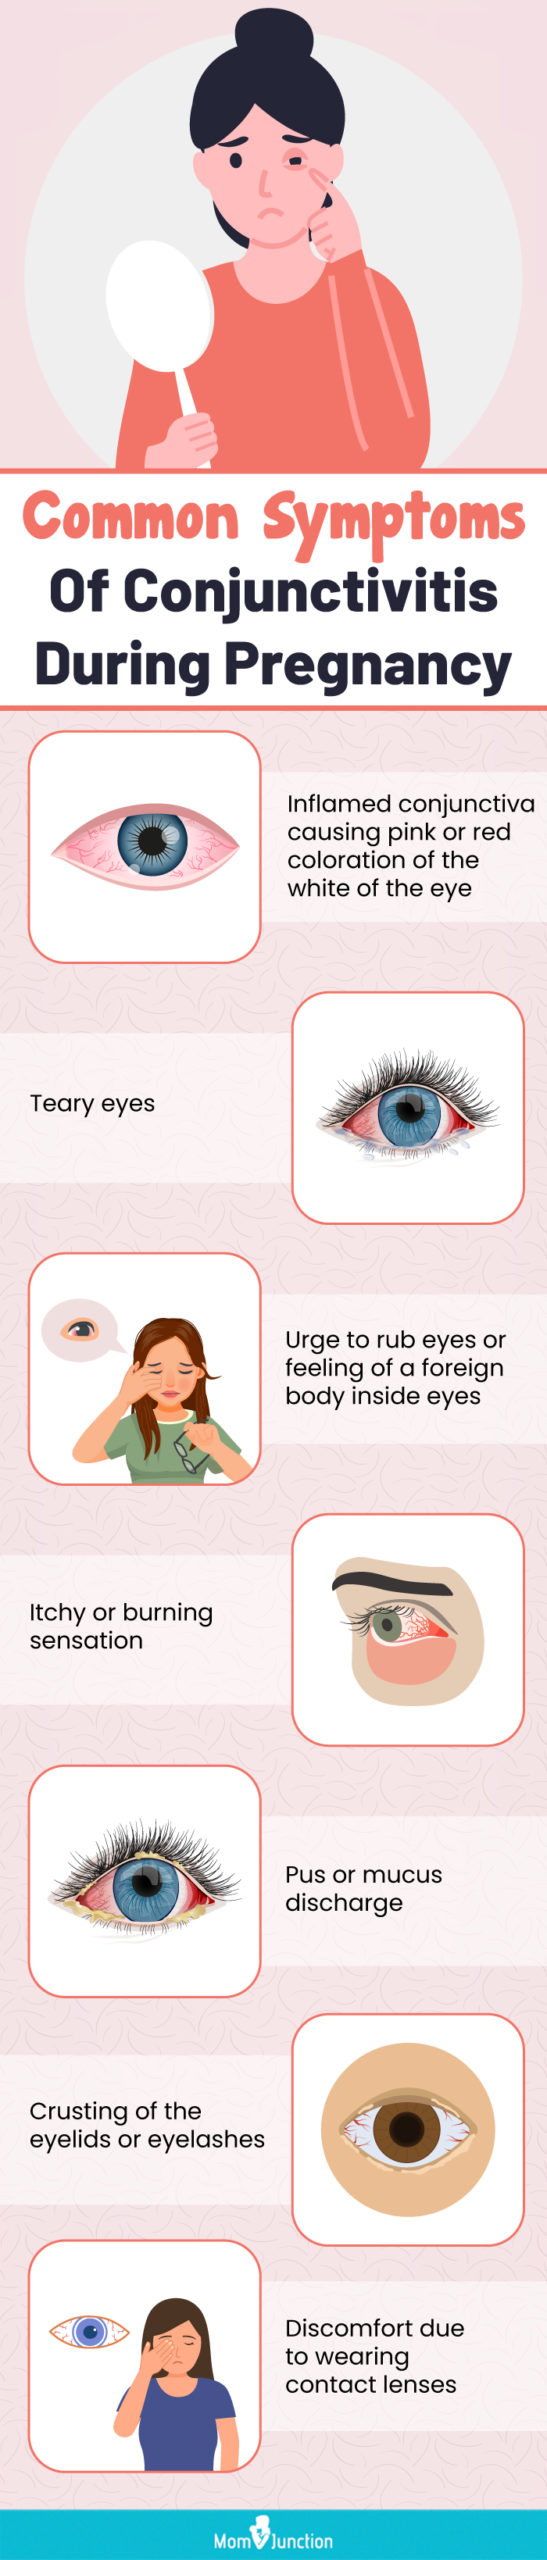 common symptoms of conjunctivitis during pregnancy (infographic)